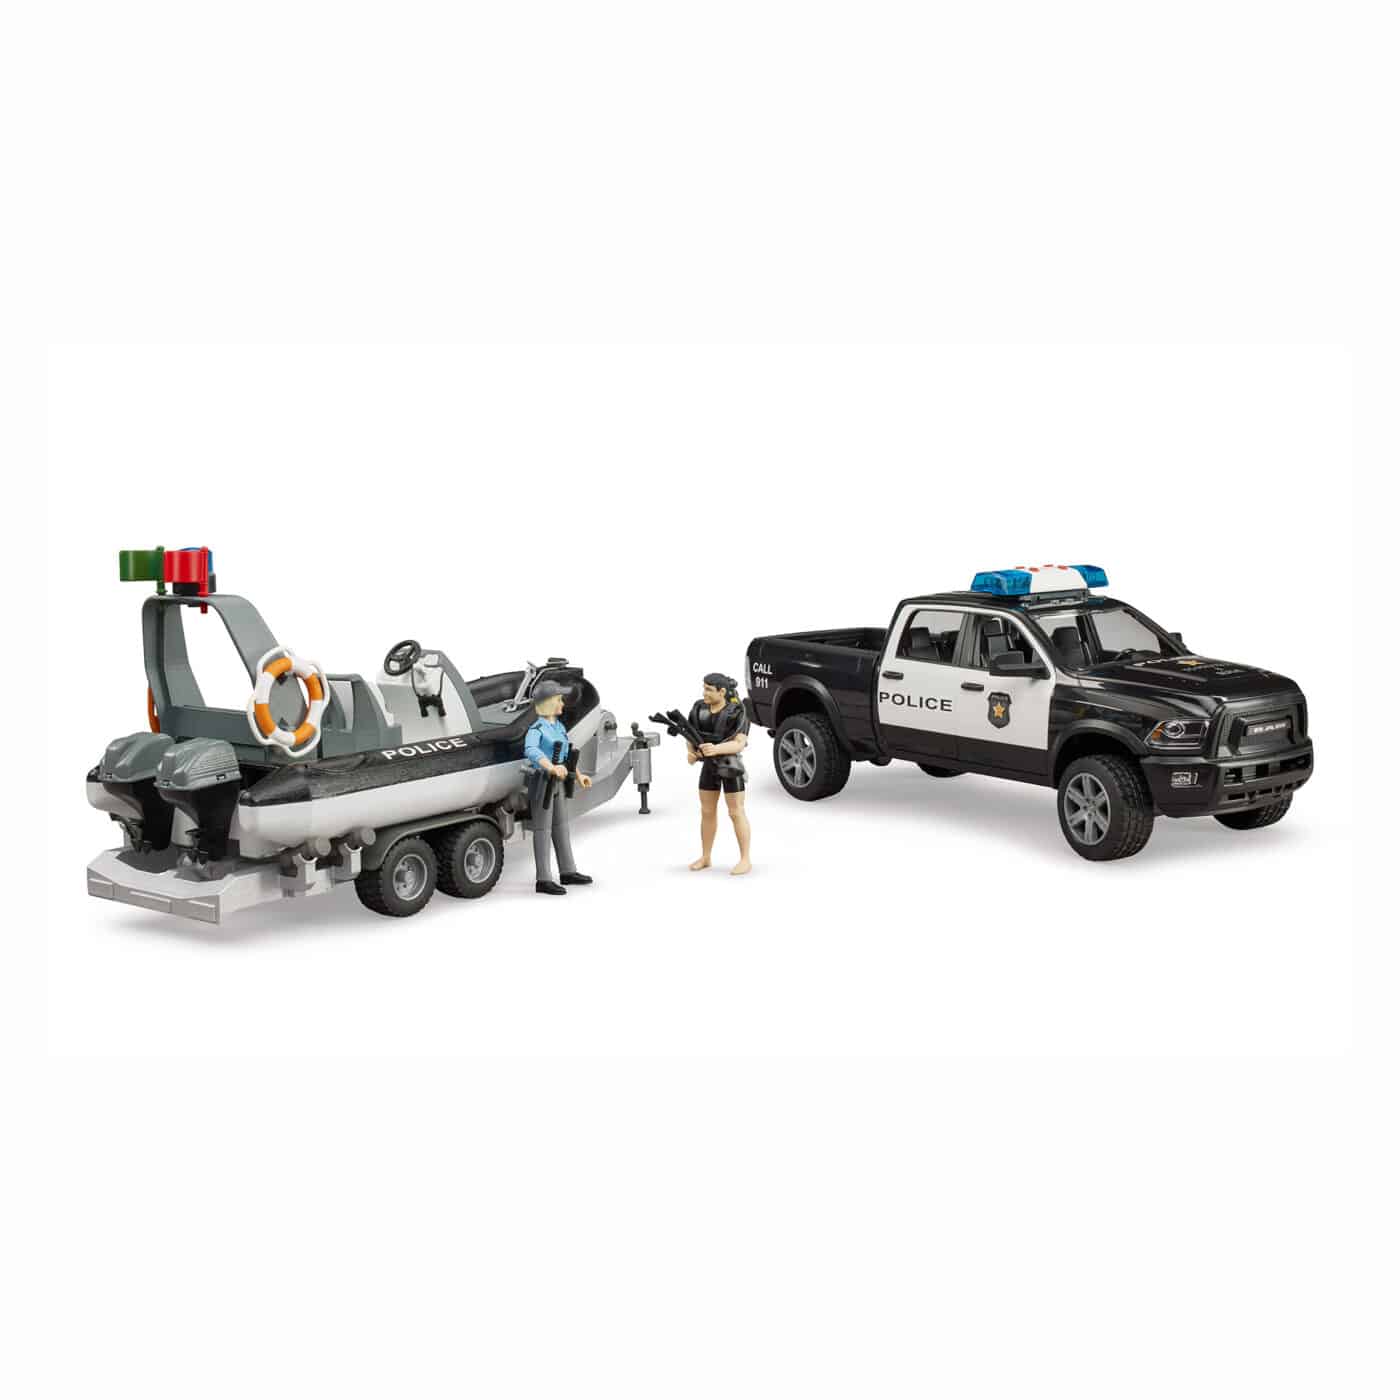 Bruder - RAM 2500 Police Pickup with Trailer, Boat and 2 Figures